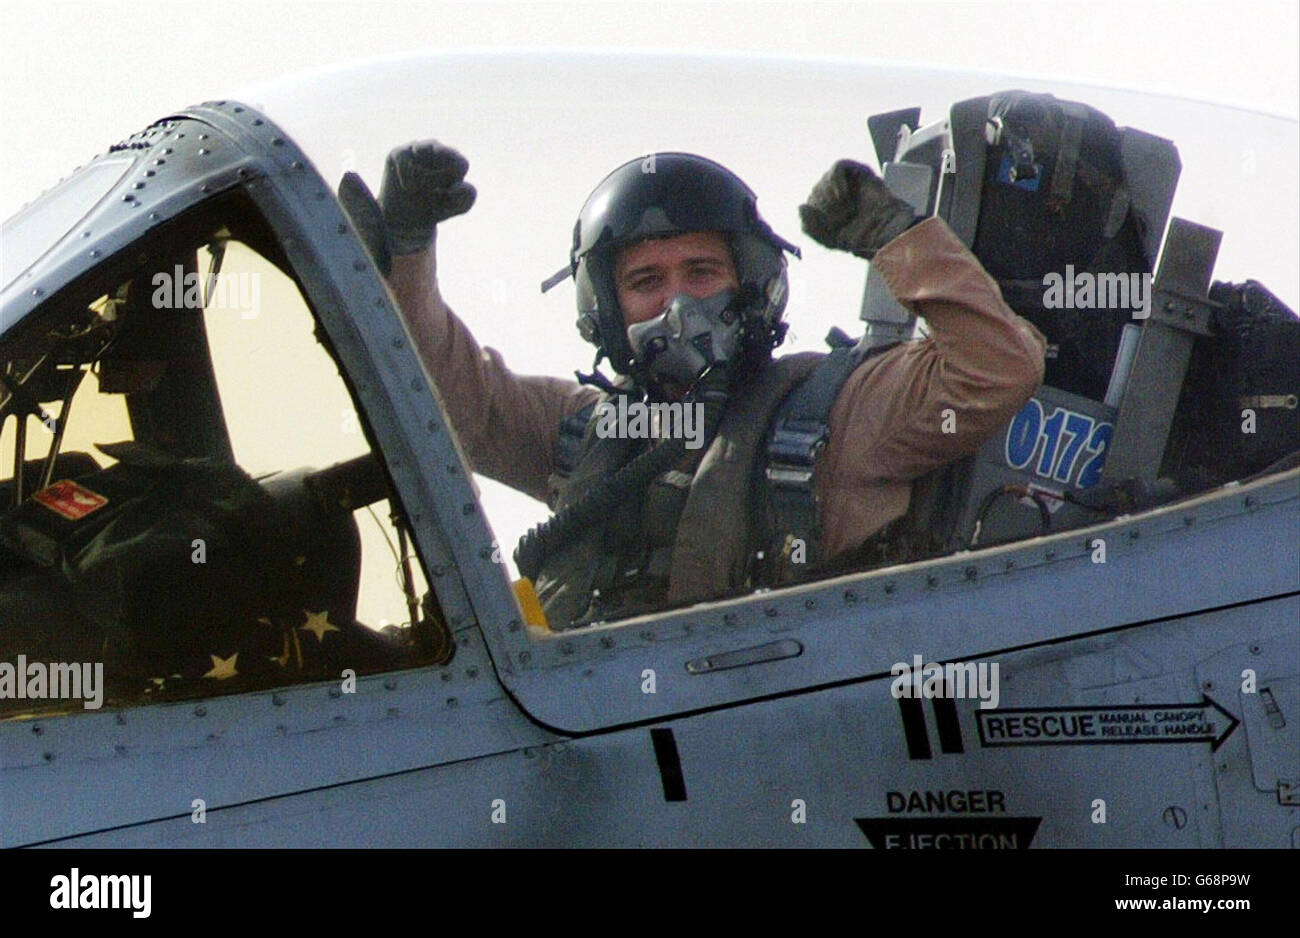 A U.S. Marine A10 pilot cheers and gestures as he taxis to the runway at his base in Kuwait before his mission over Iraq. The United States and Britain unleashed their first daylight air strikes on Baghdad after pounding it with a fearsome night blitz. Stock Photo